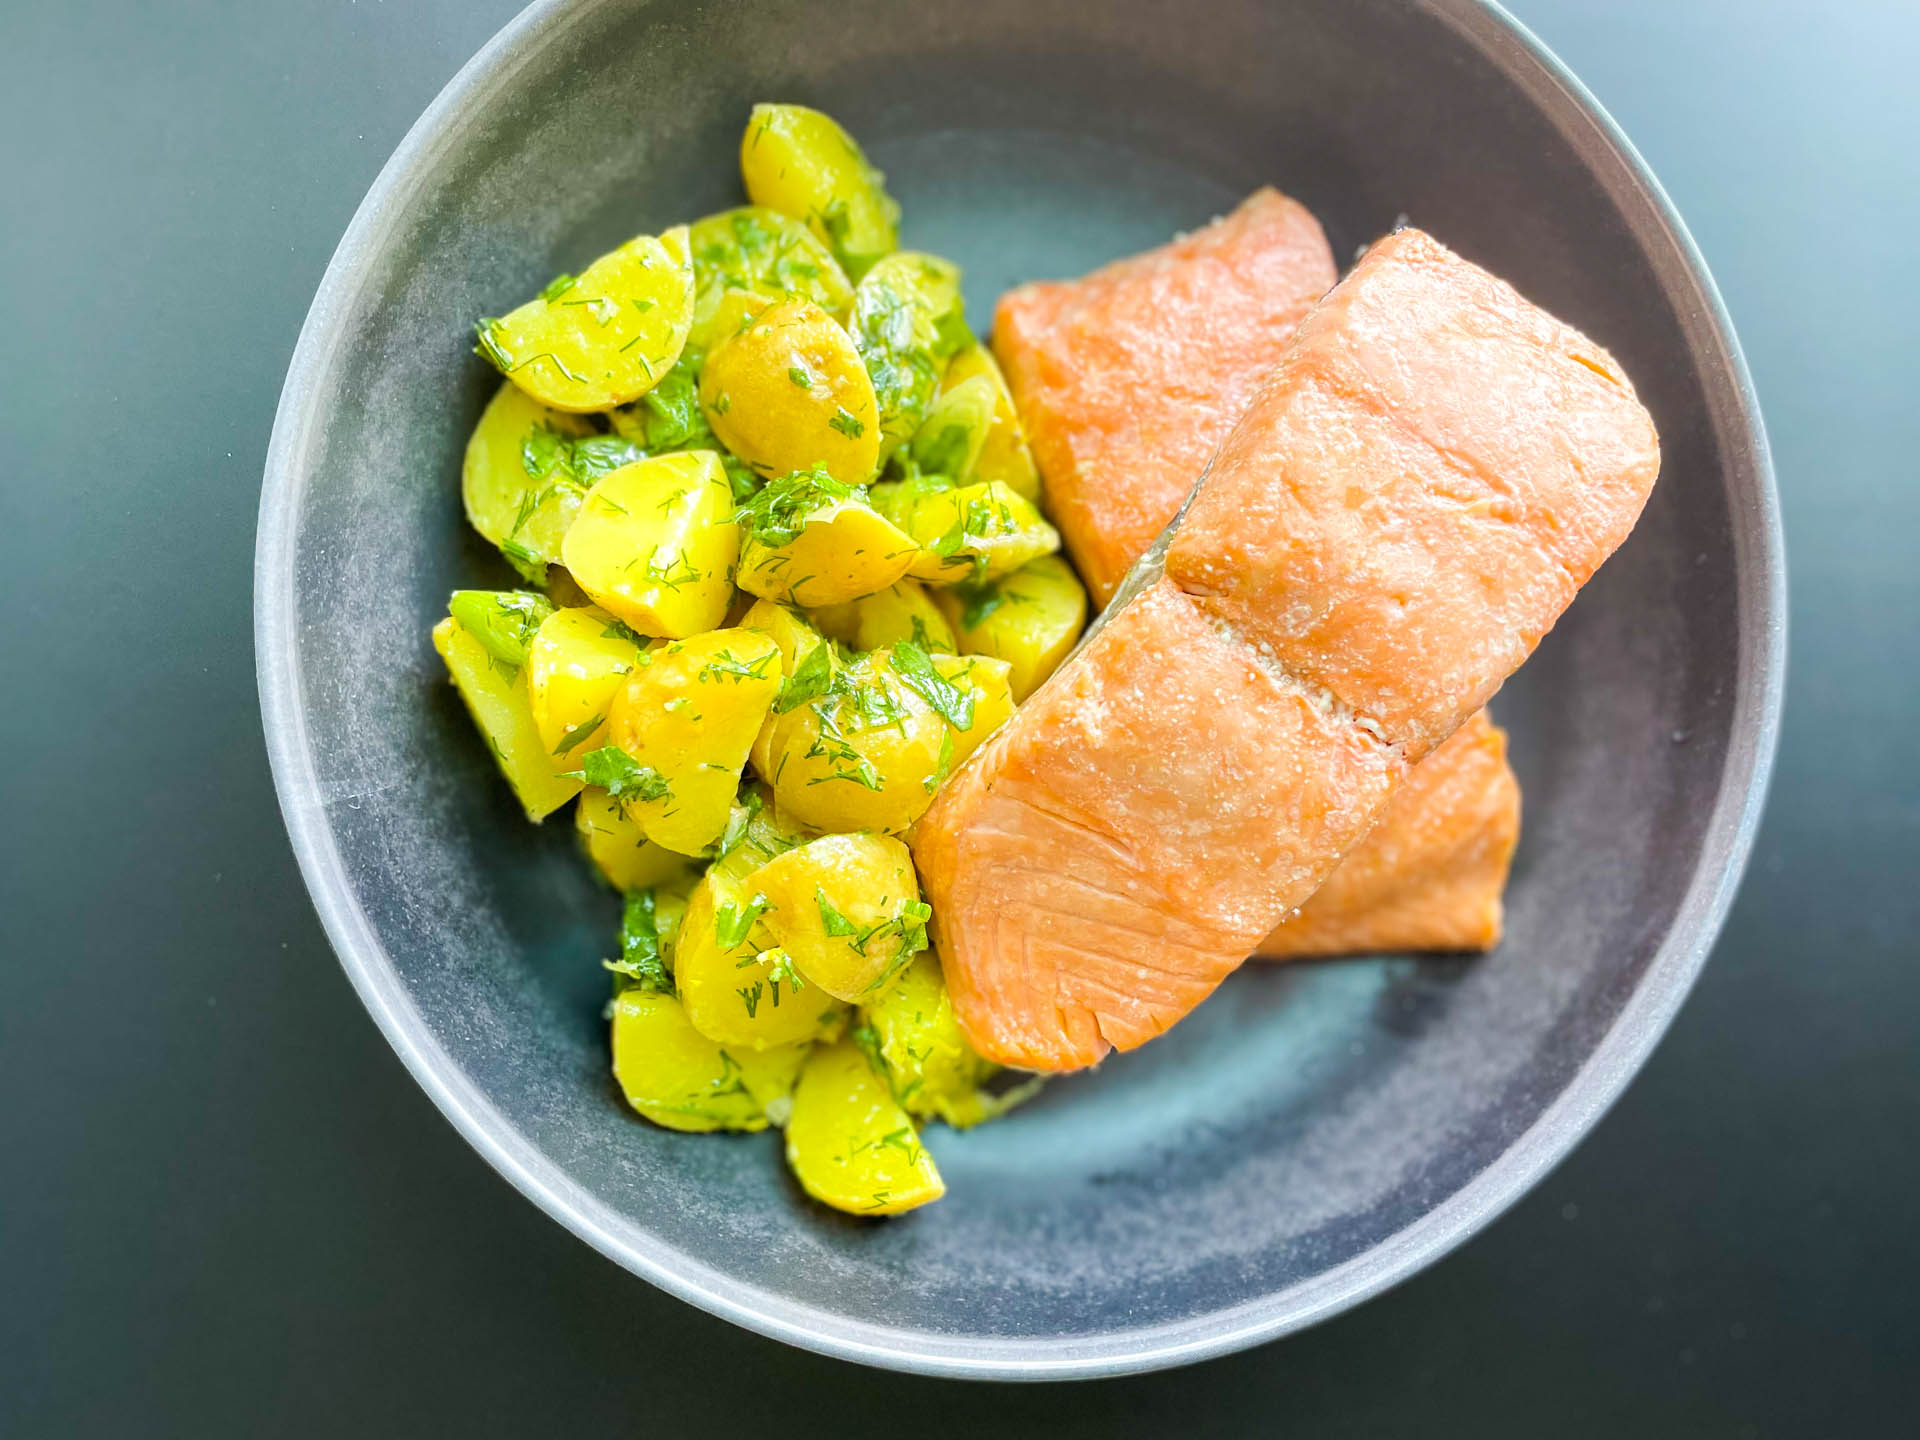 Poached salmon with herb and potato salad.